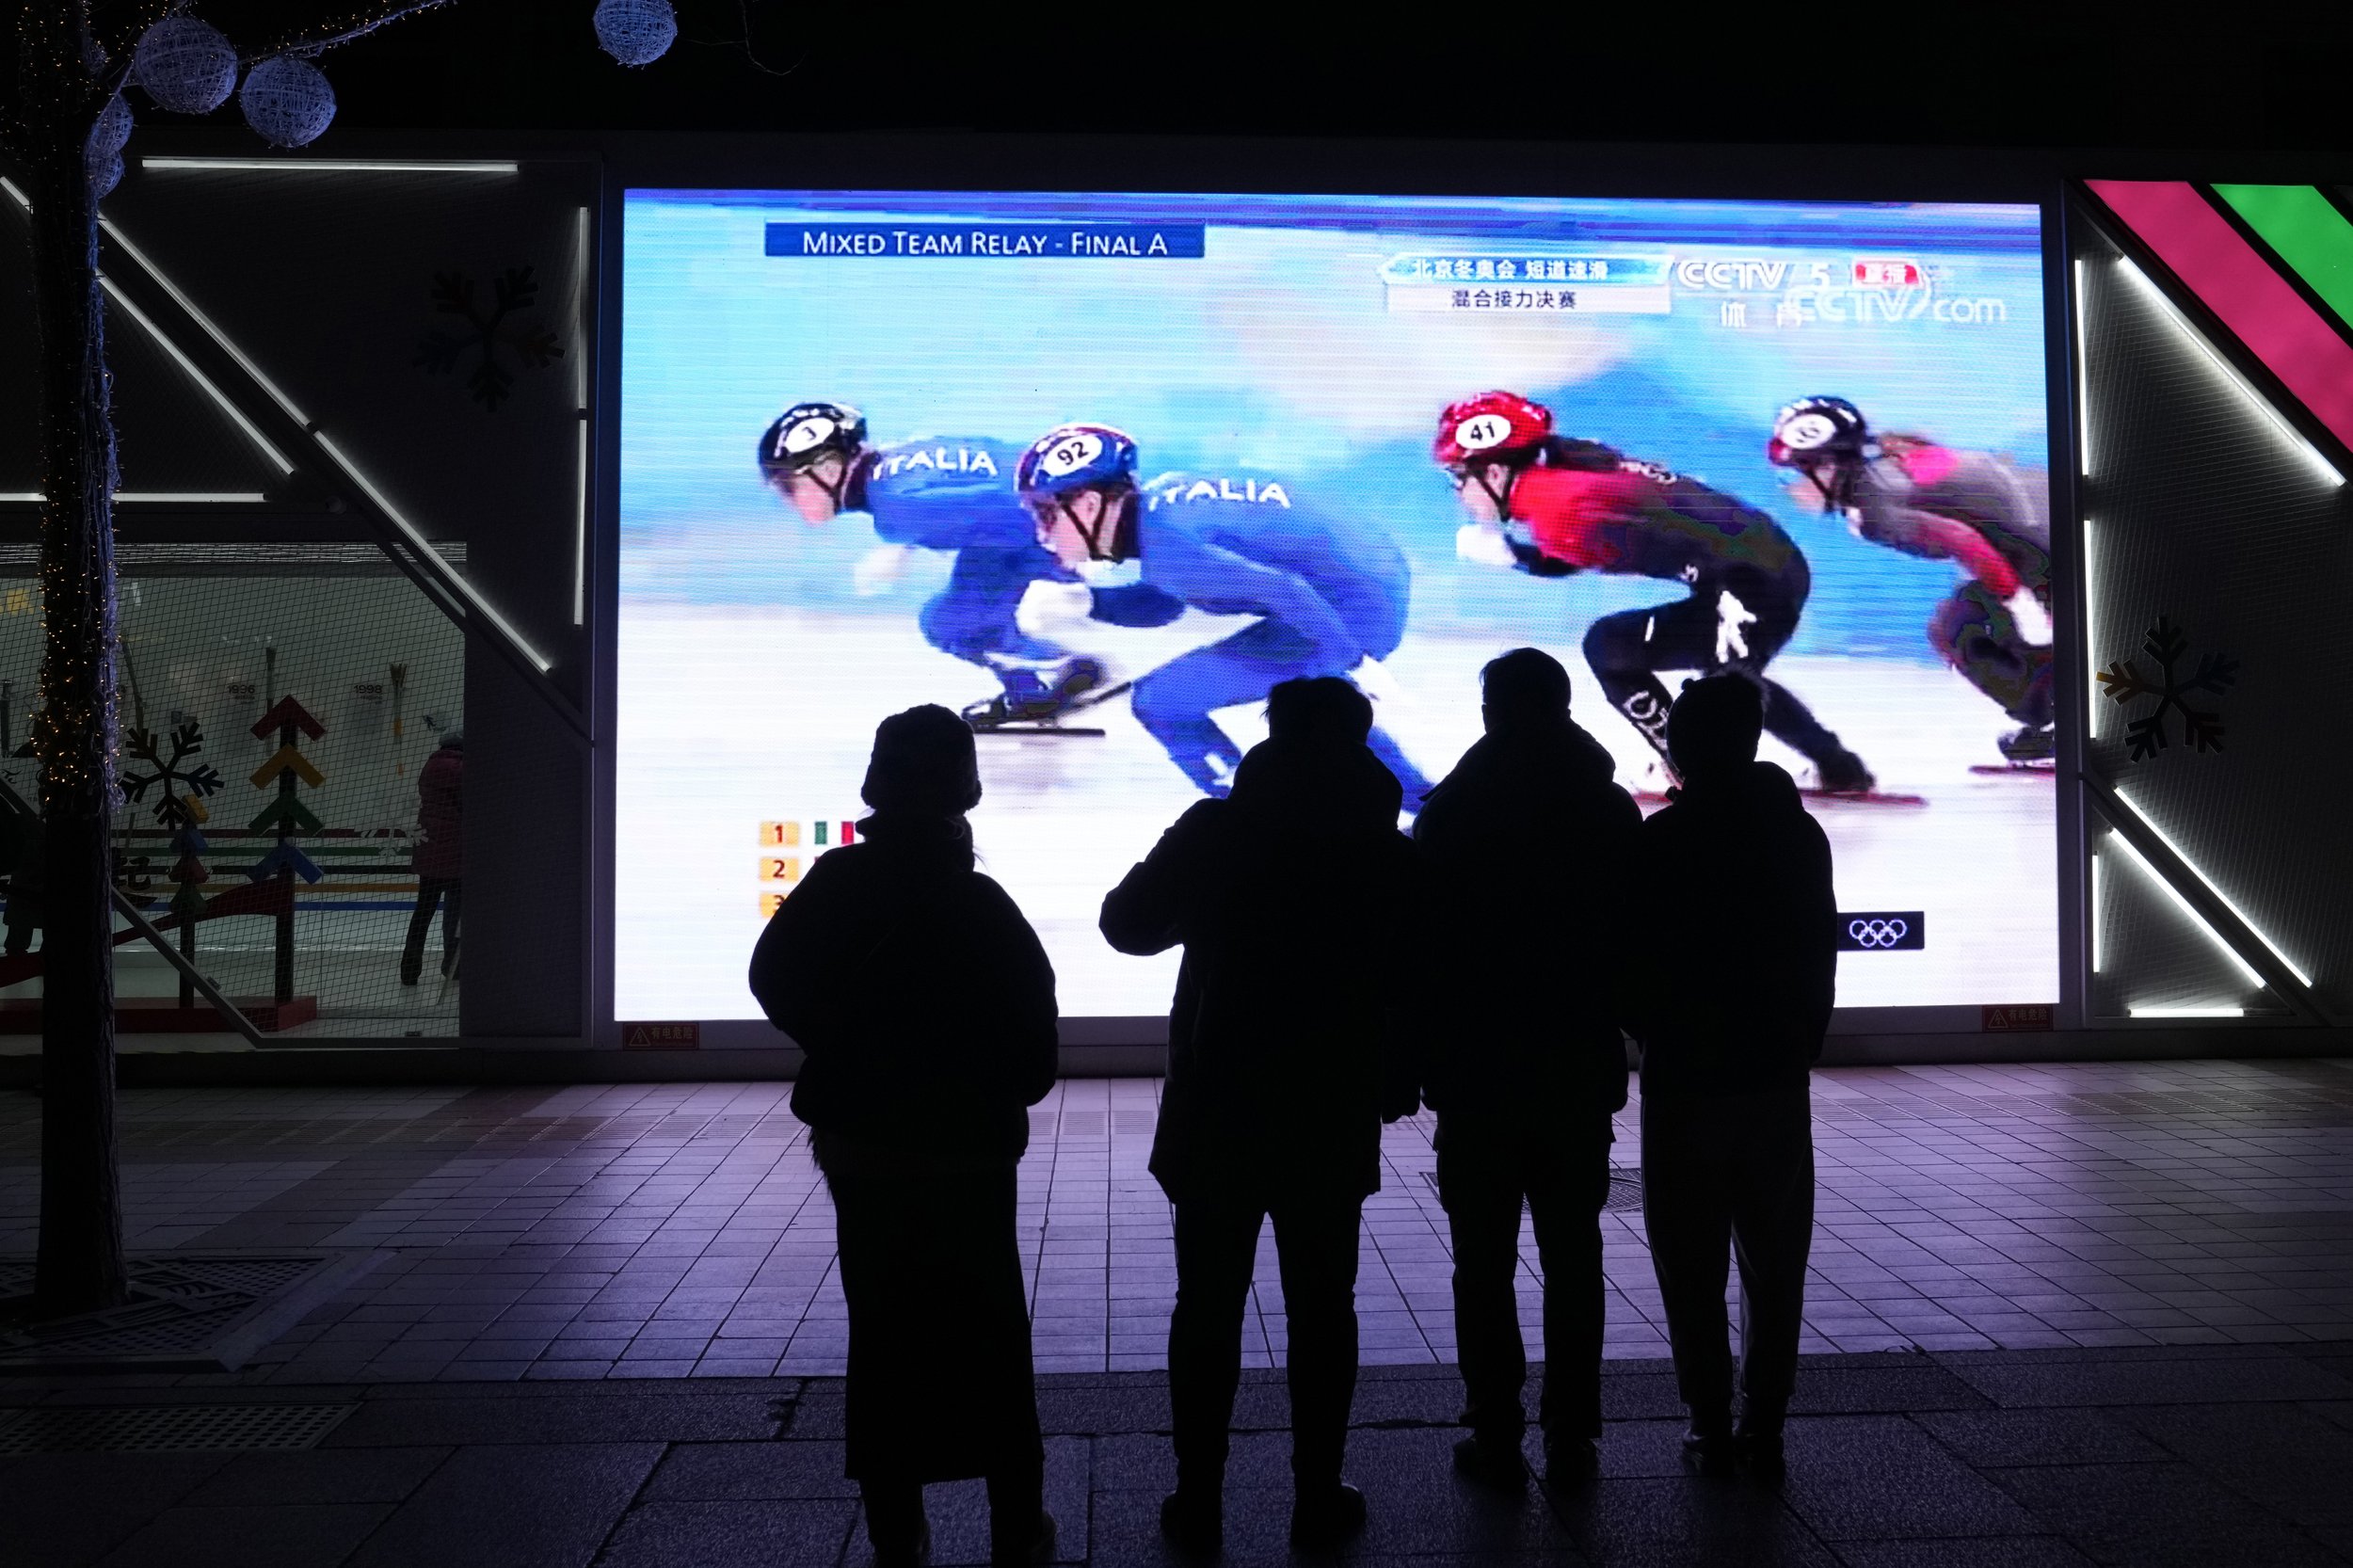  Residents watch a big screen showing China's team in the mixed team relay final during the short track speedskating competition at the 2022 Winter Olympics in Beijing, China, Saturday, Feb. 5, 2022. (AP Photo/Ng Han Guan) 